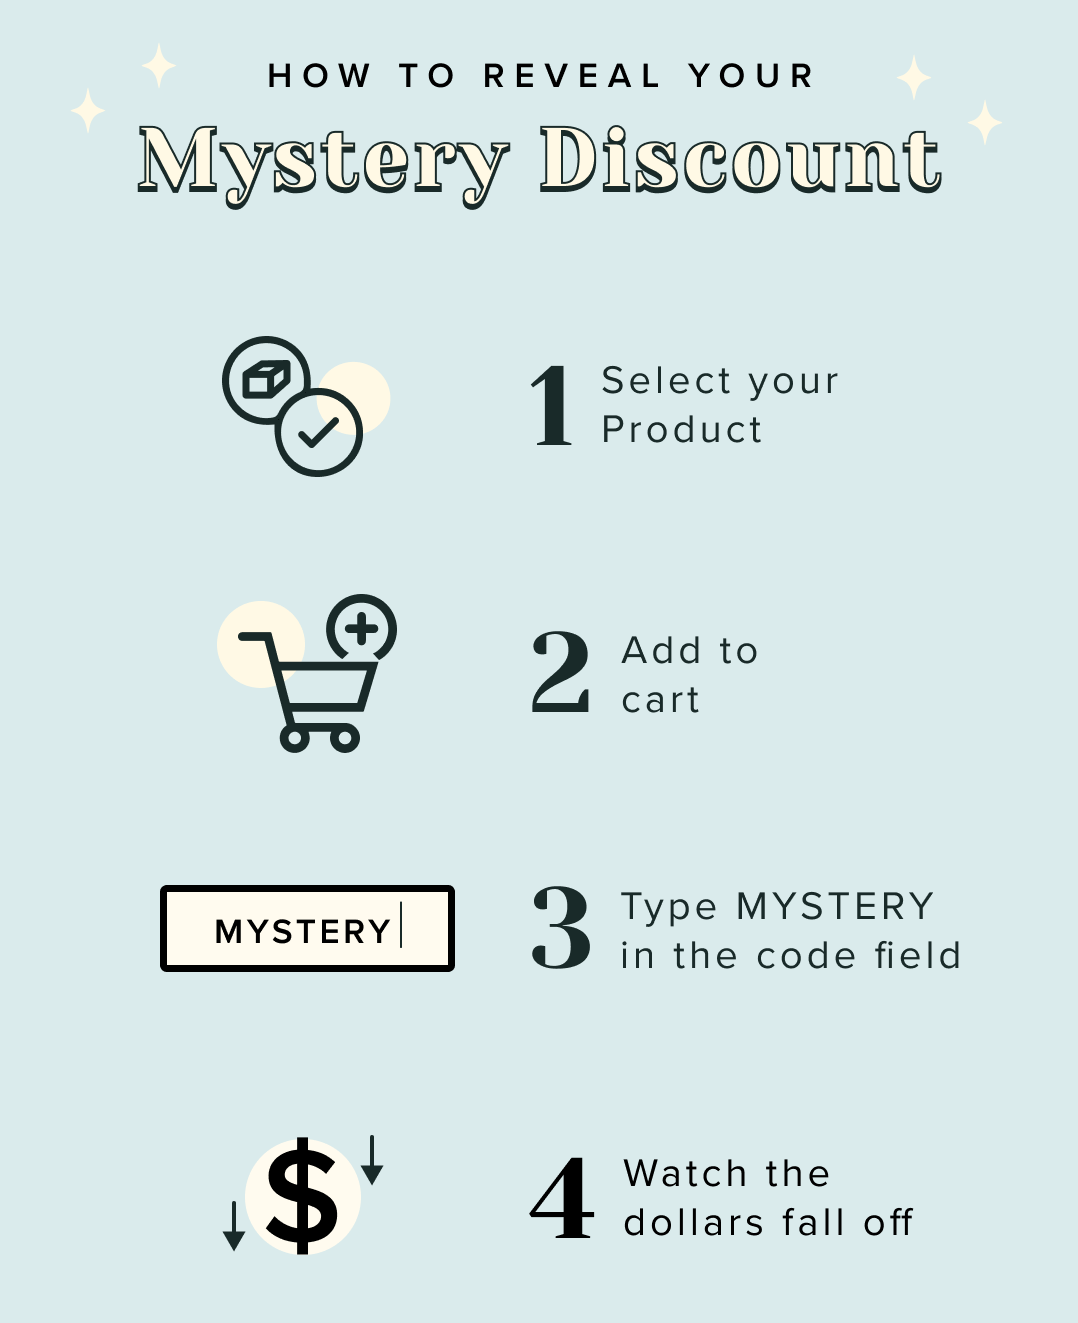 How to reveal your mystery discount